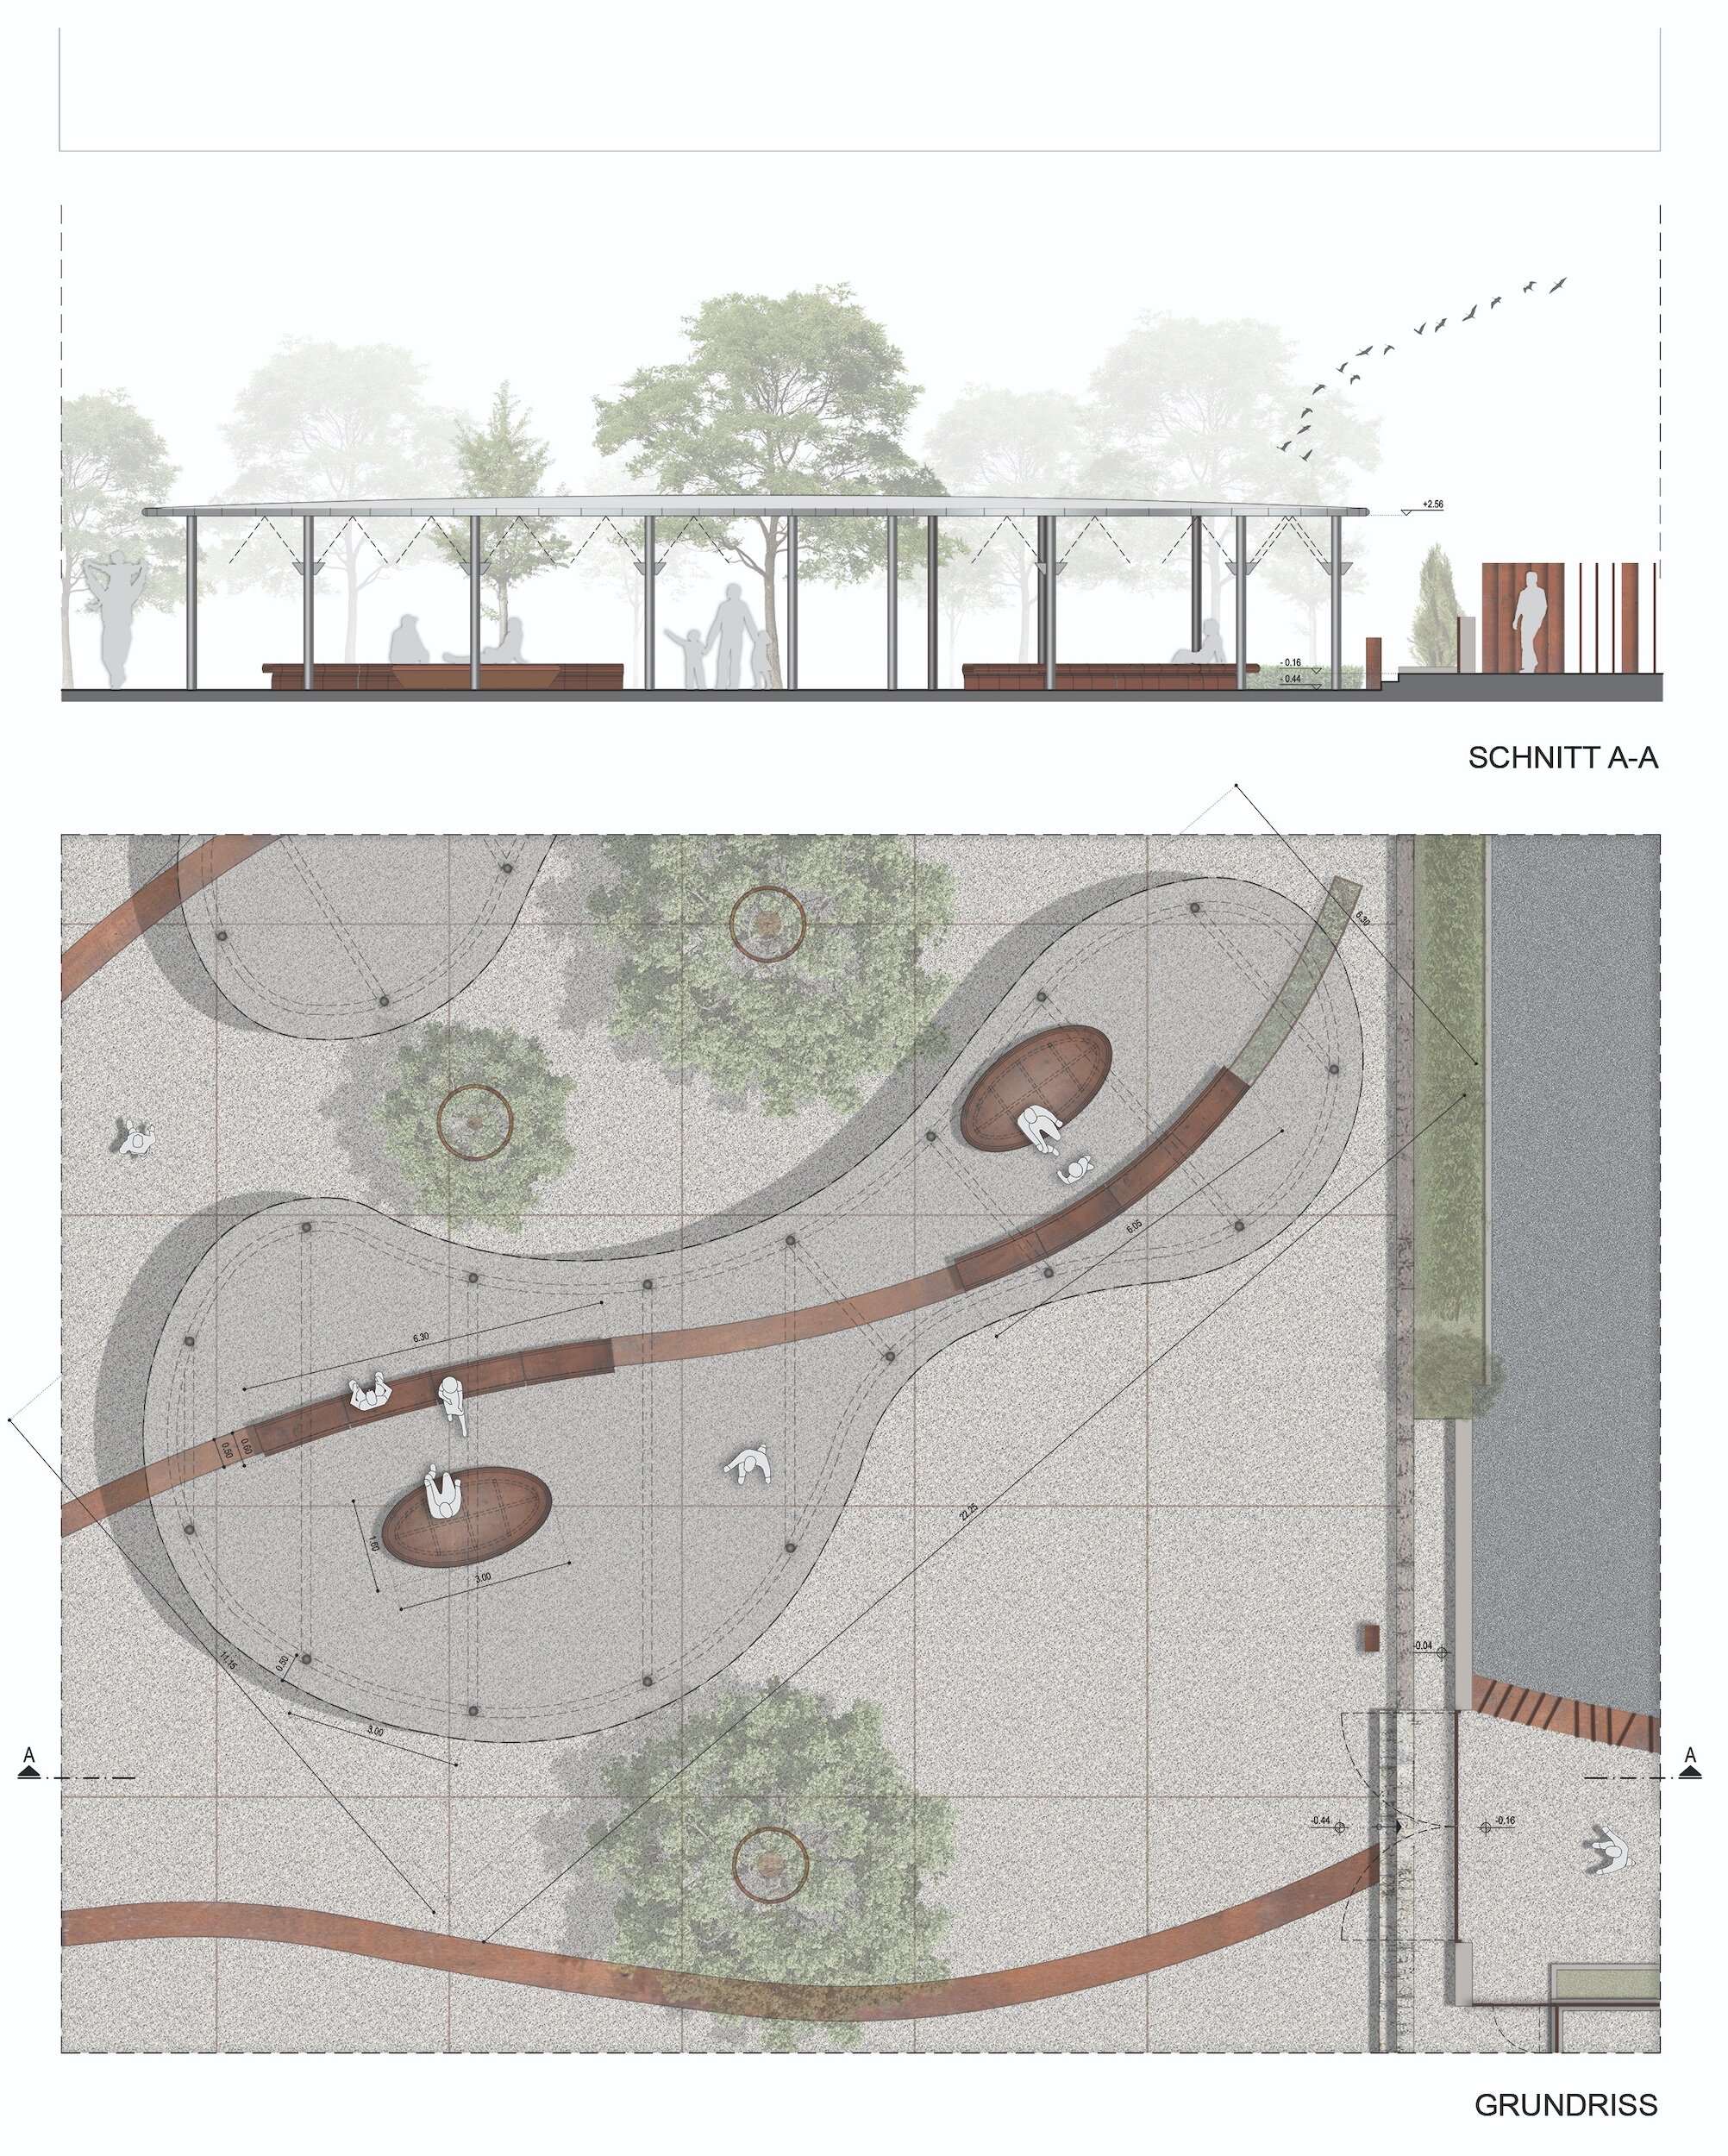 GERMAN SCHOOL OF ATHENS, REDESIGN OF THE OUTDOOR SPACE _ ATHENS 